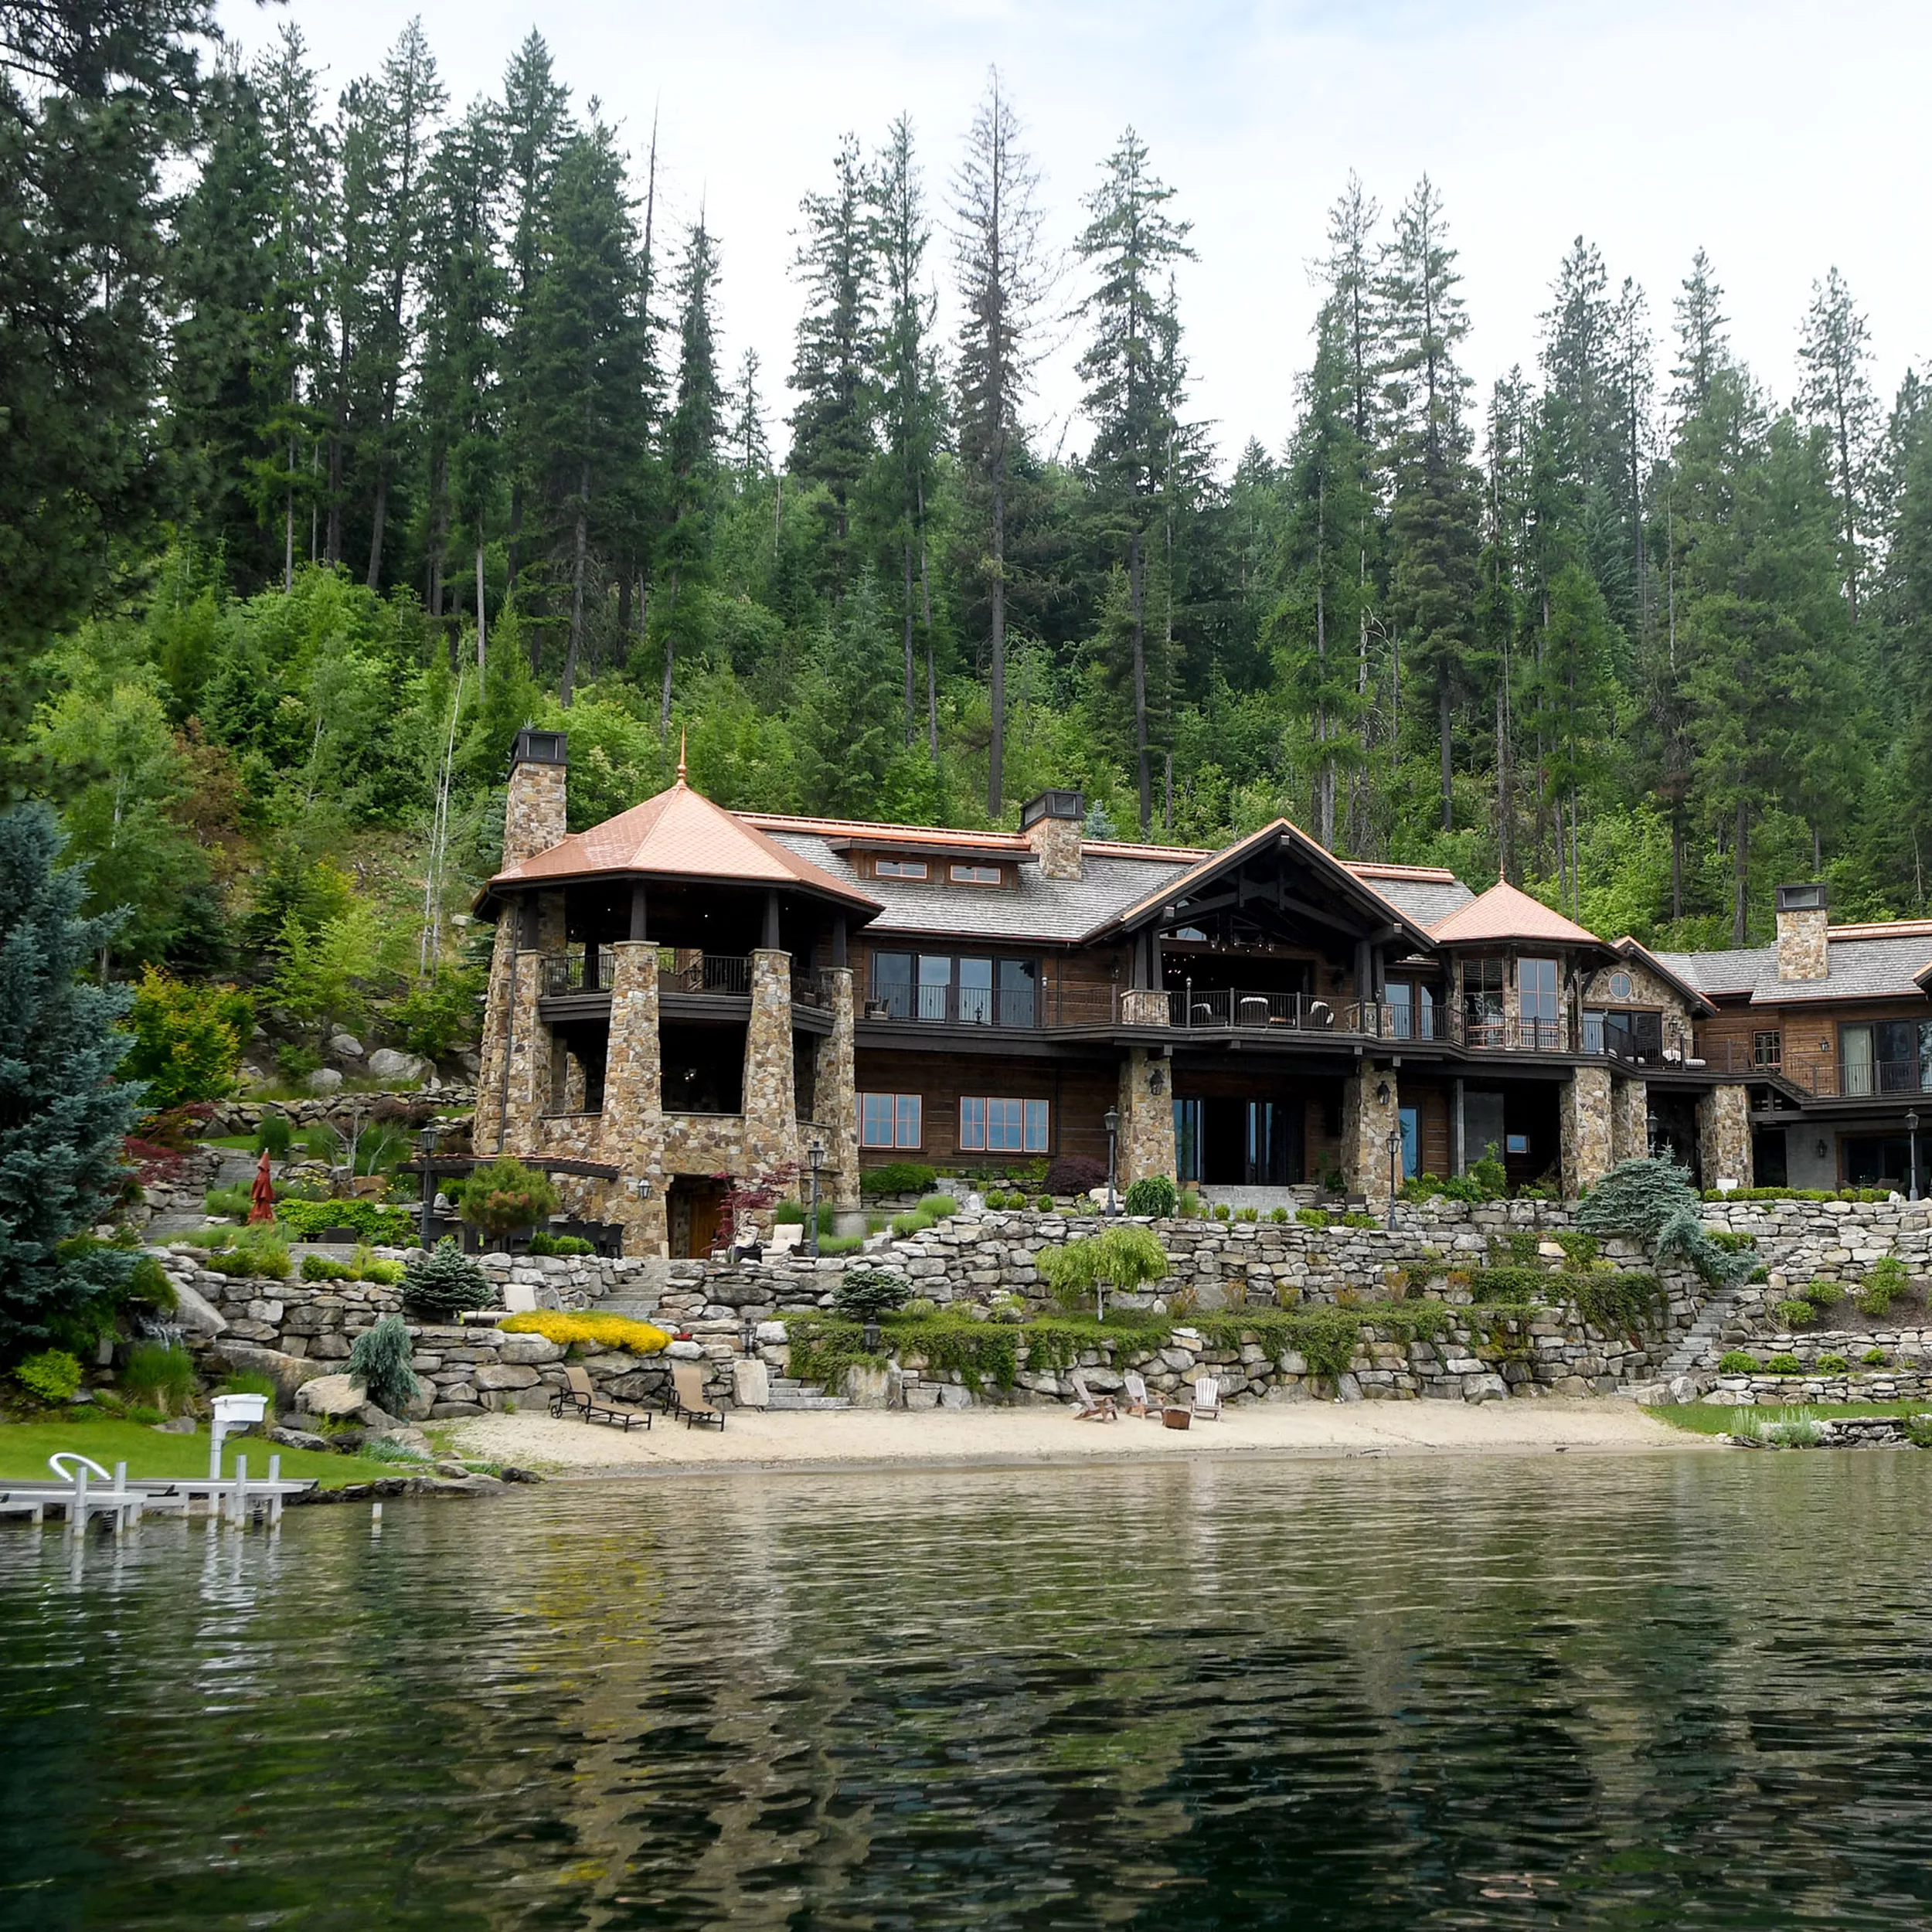 What's My Home Worth In Coeur d'Alene